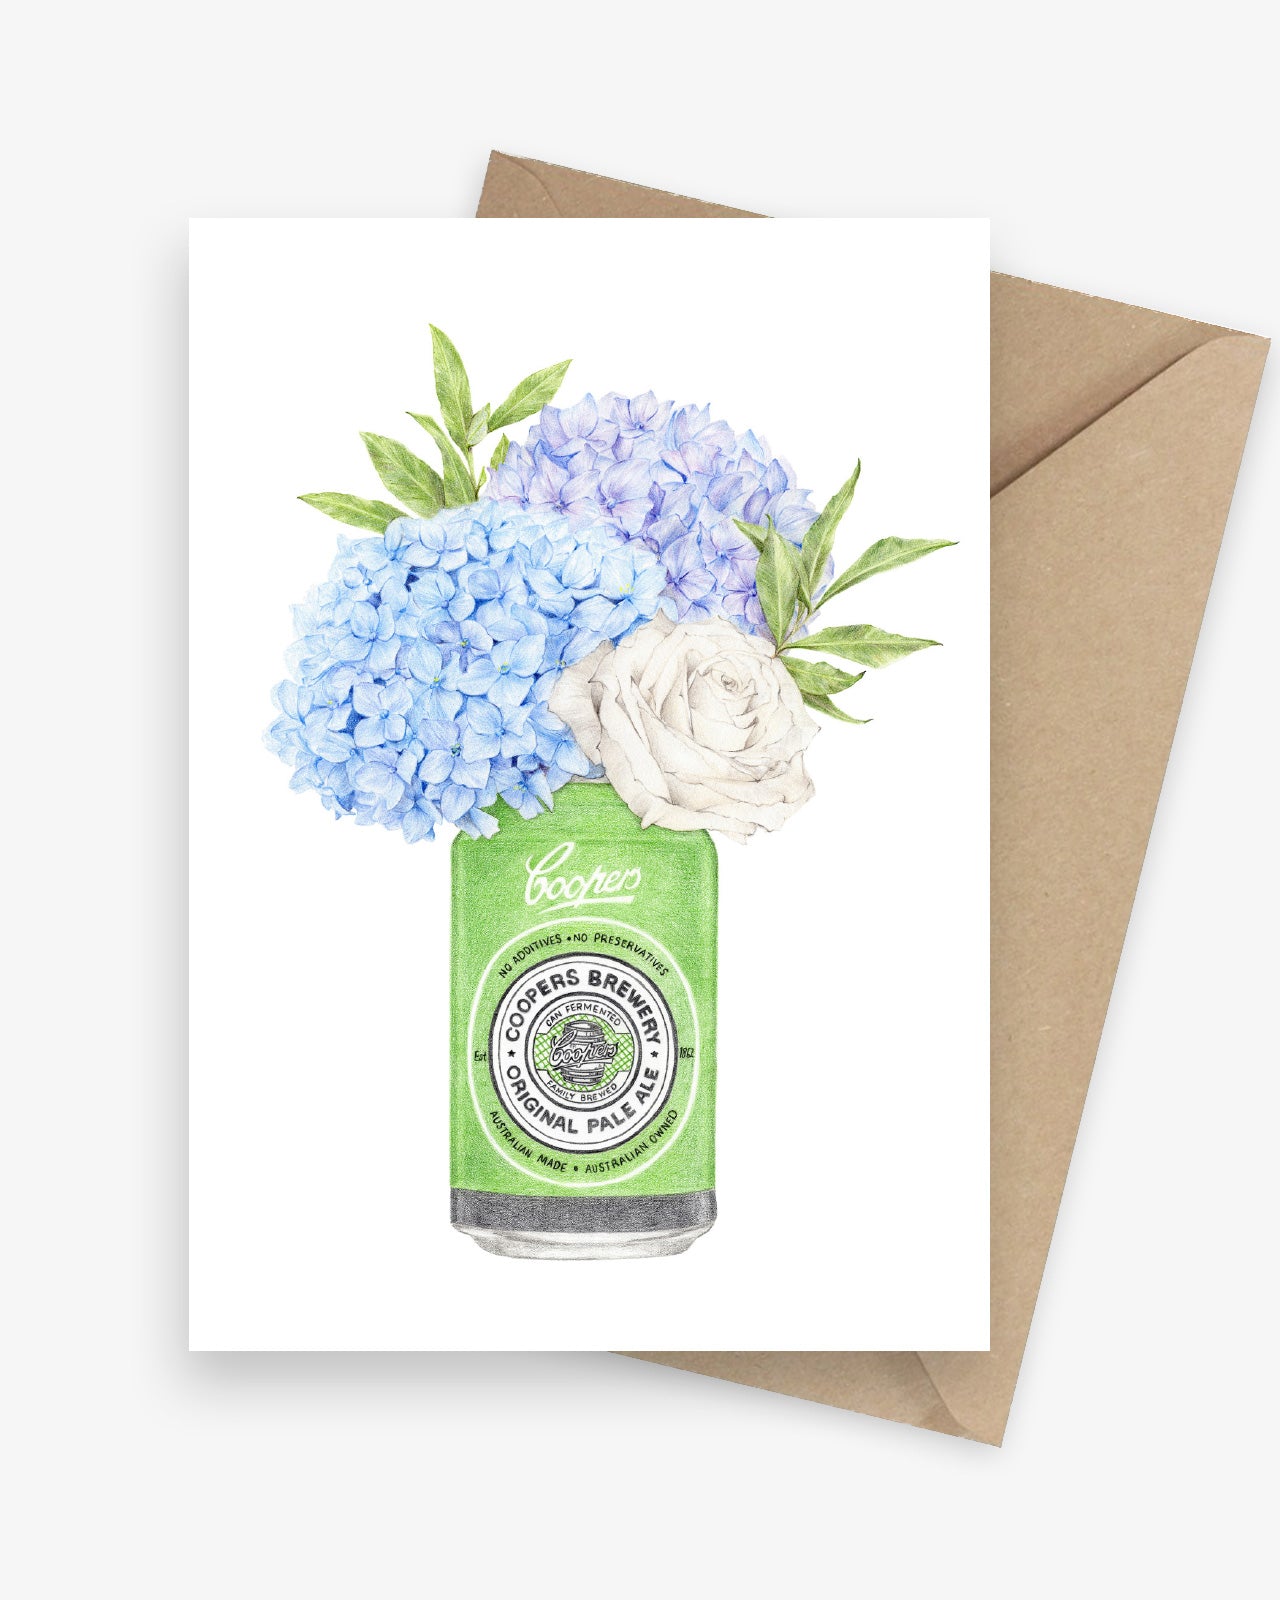 Coopers Beer with Hydrangeas Botanical Greeting Card